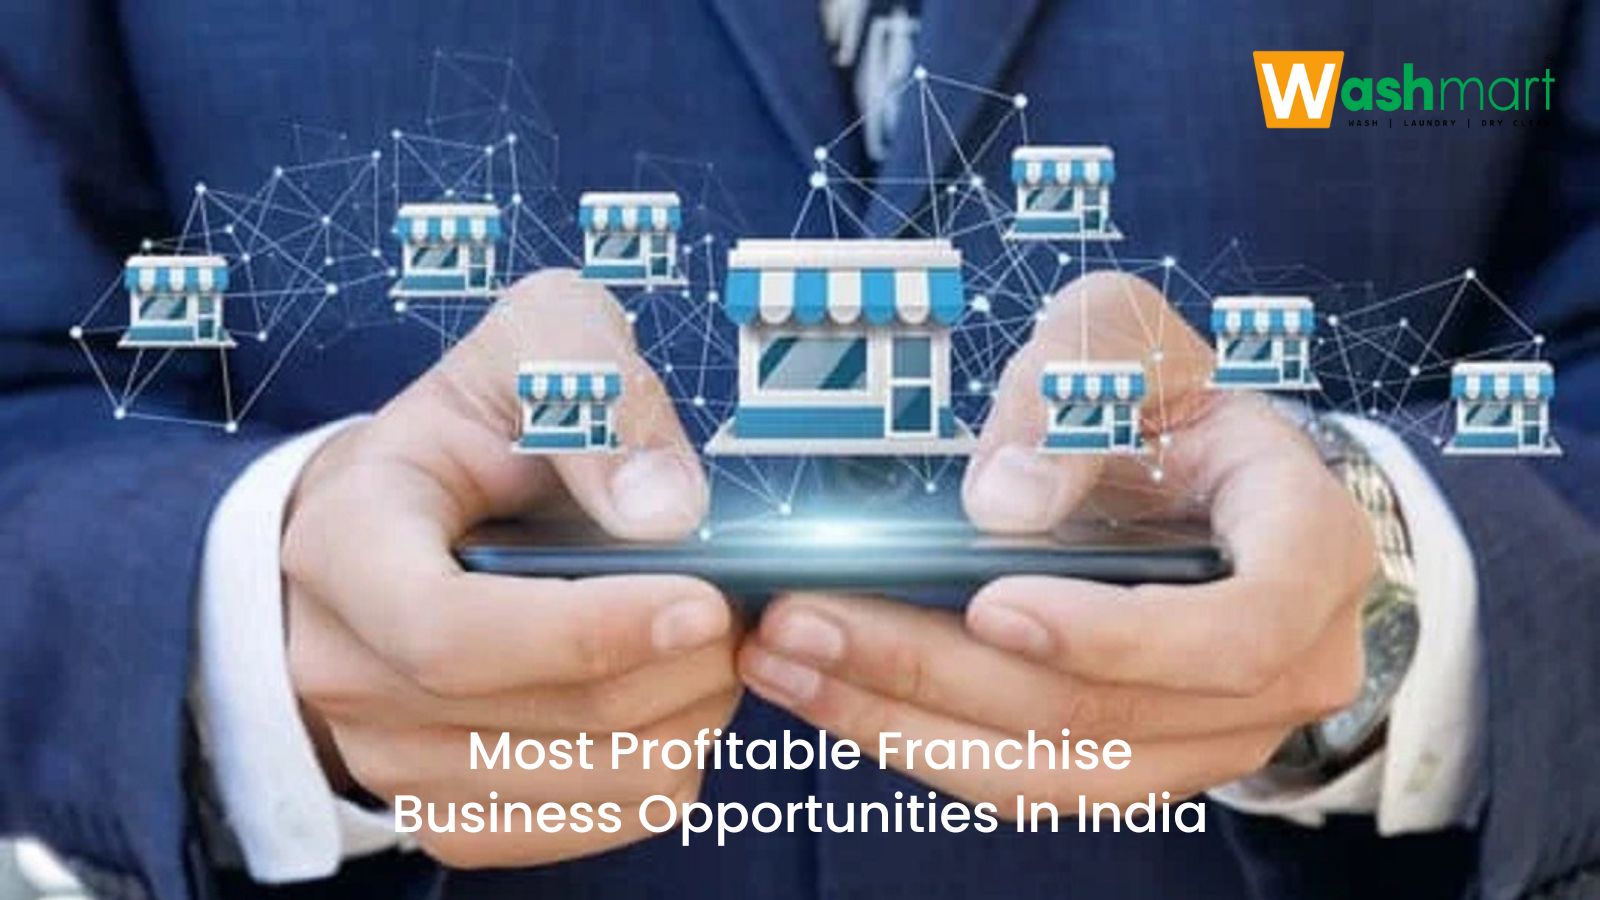 Most Profitable Franchise Business Opportunities In India || Washmart